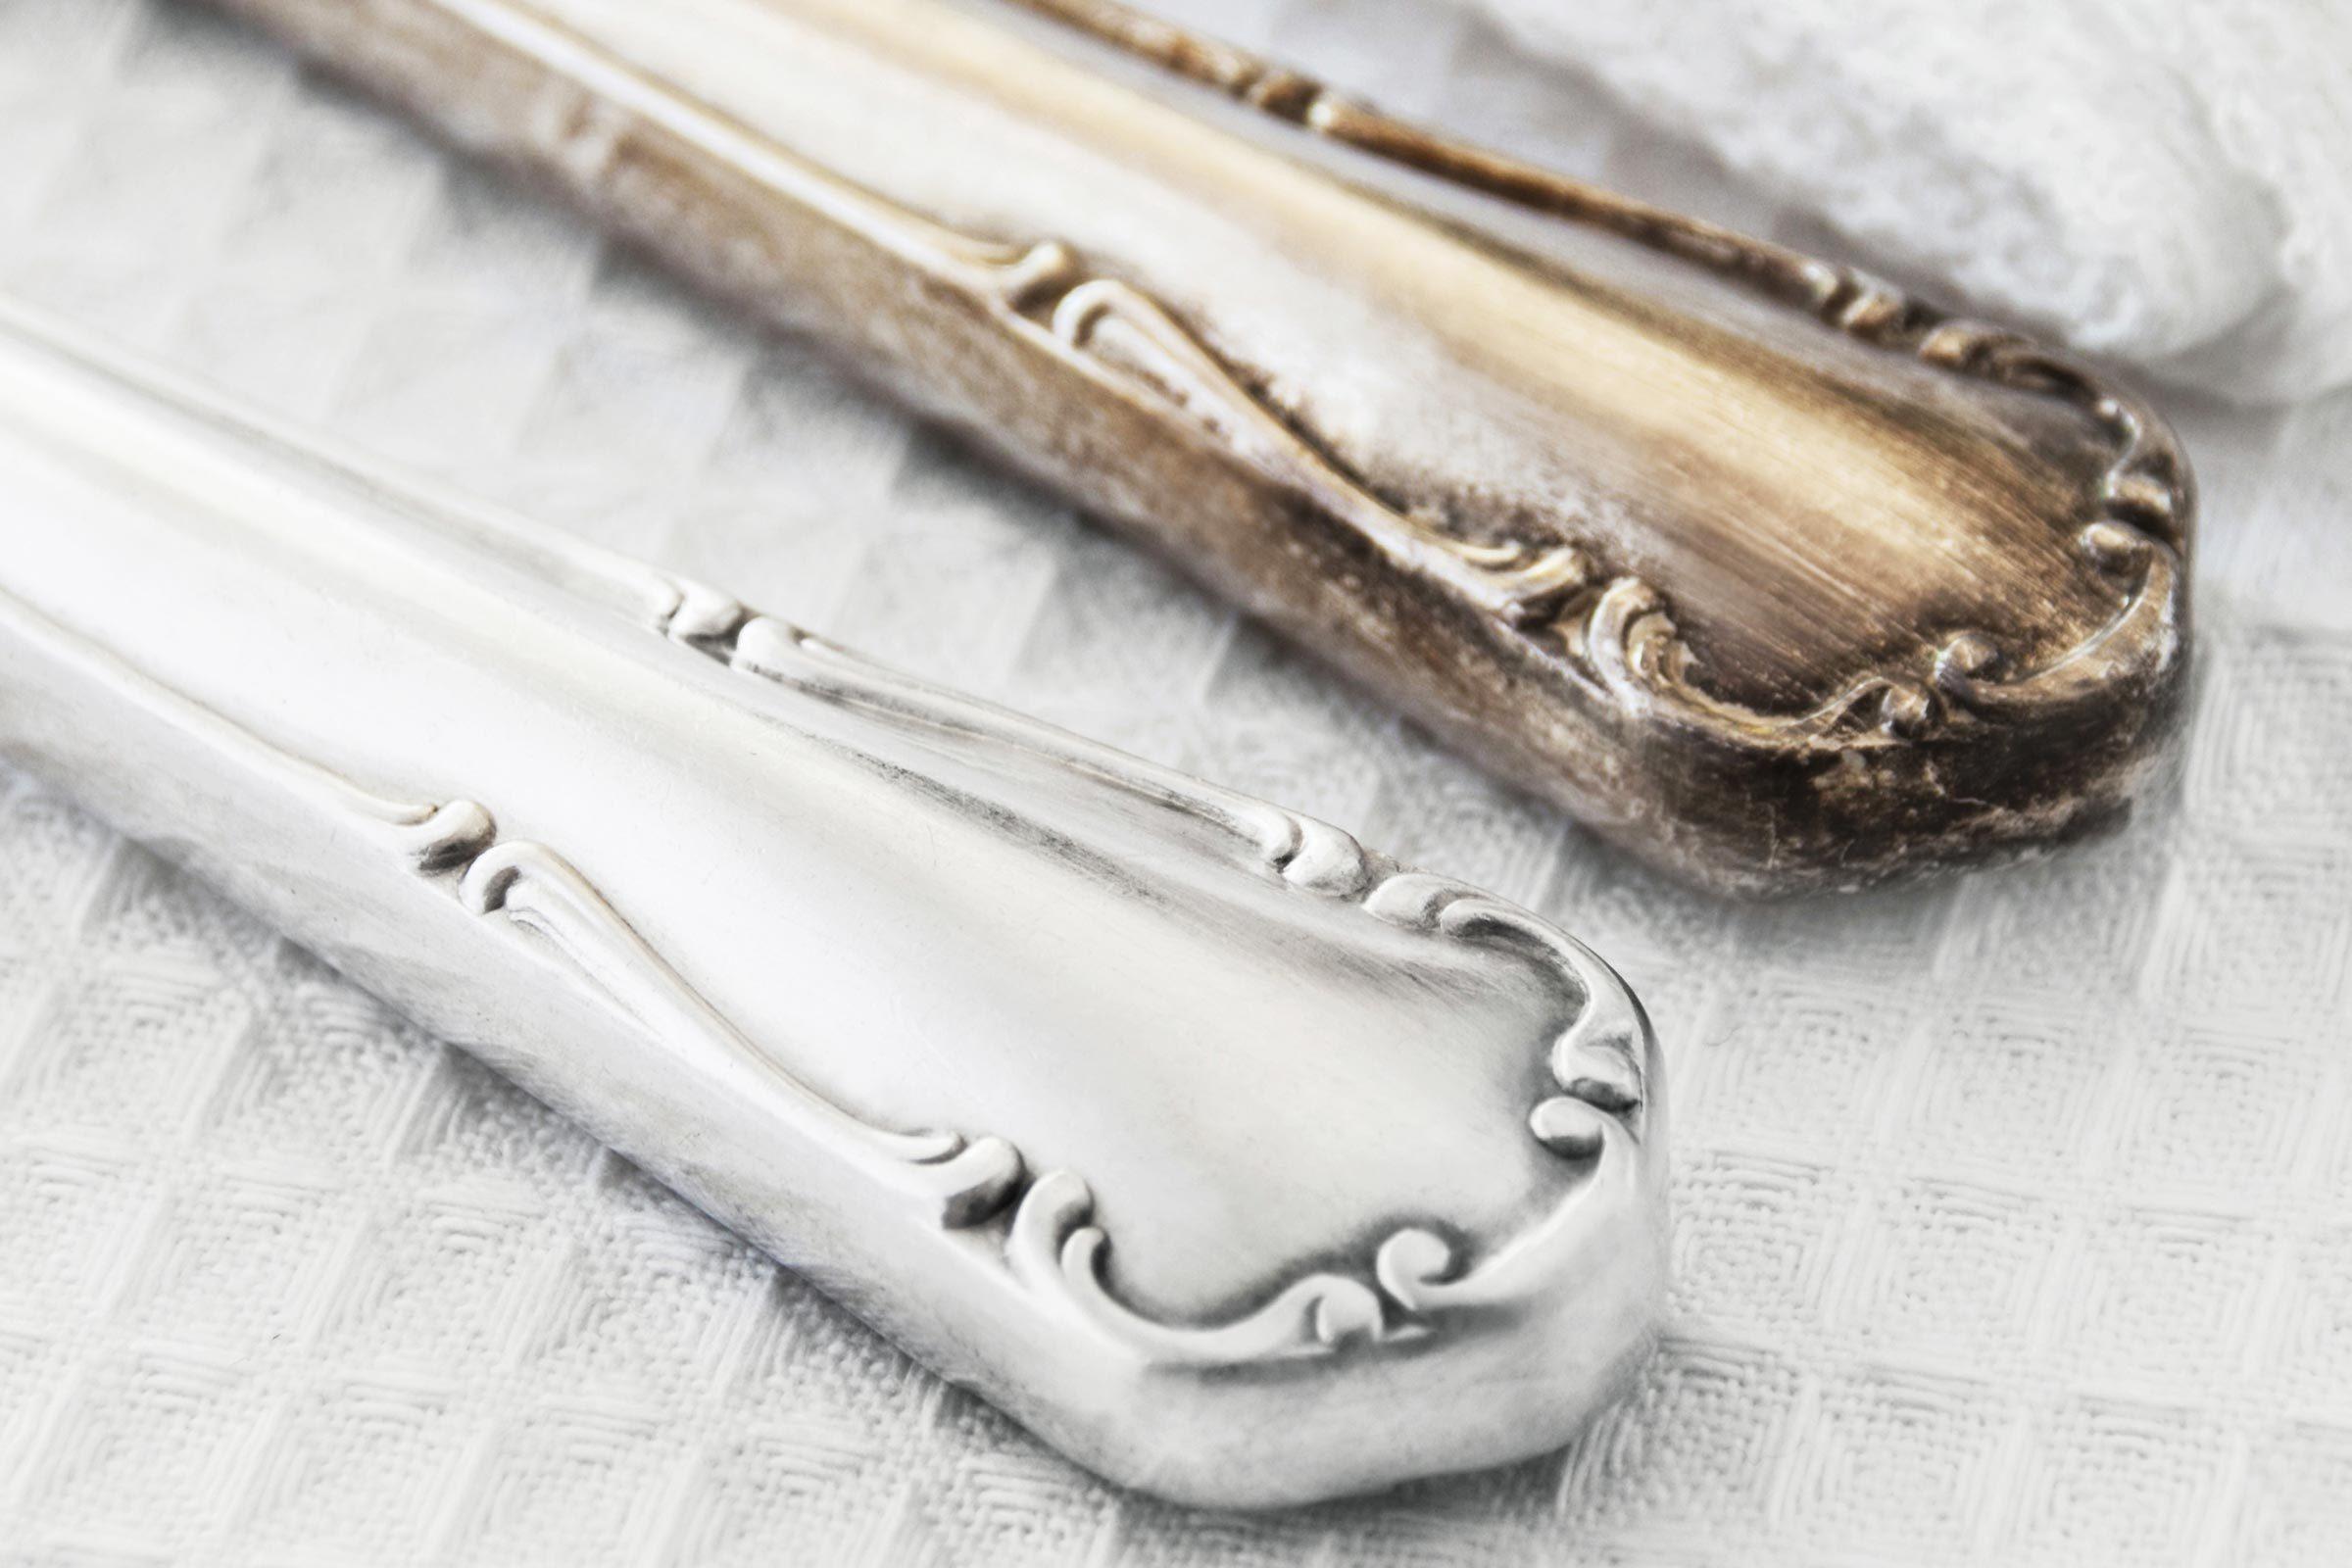 How to Clean Silver Naturally with an Easy Non-Toxic Tarnish Remover